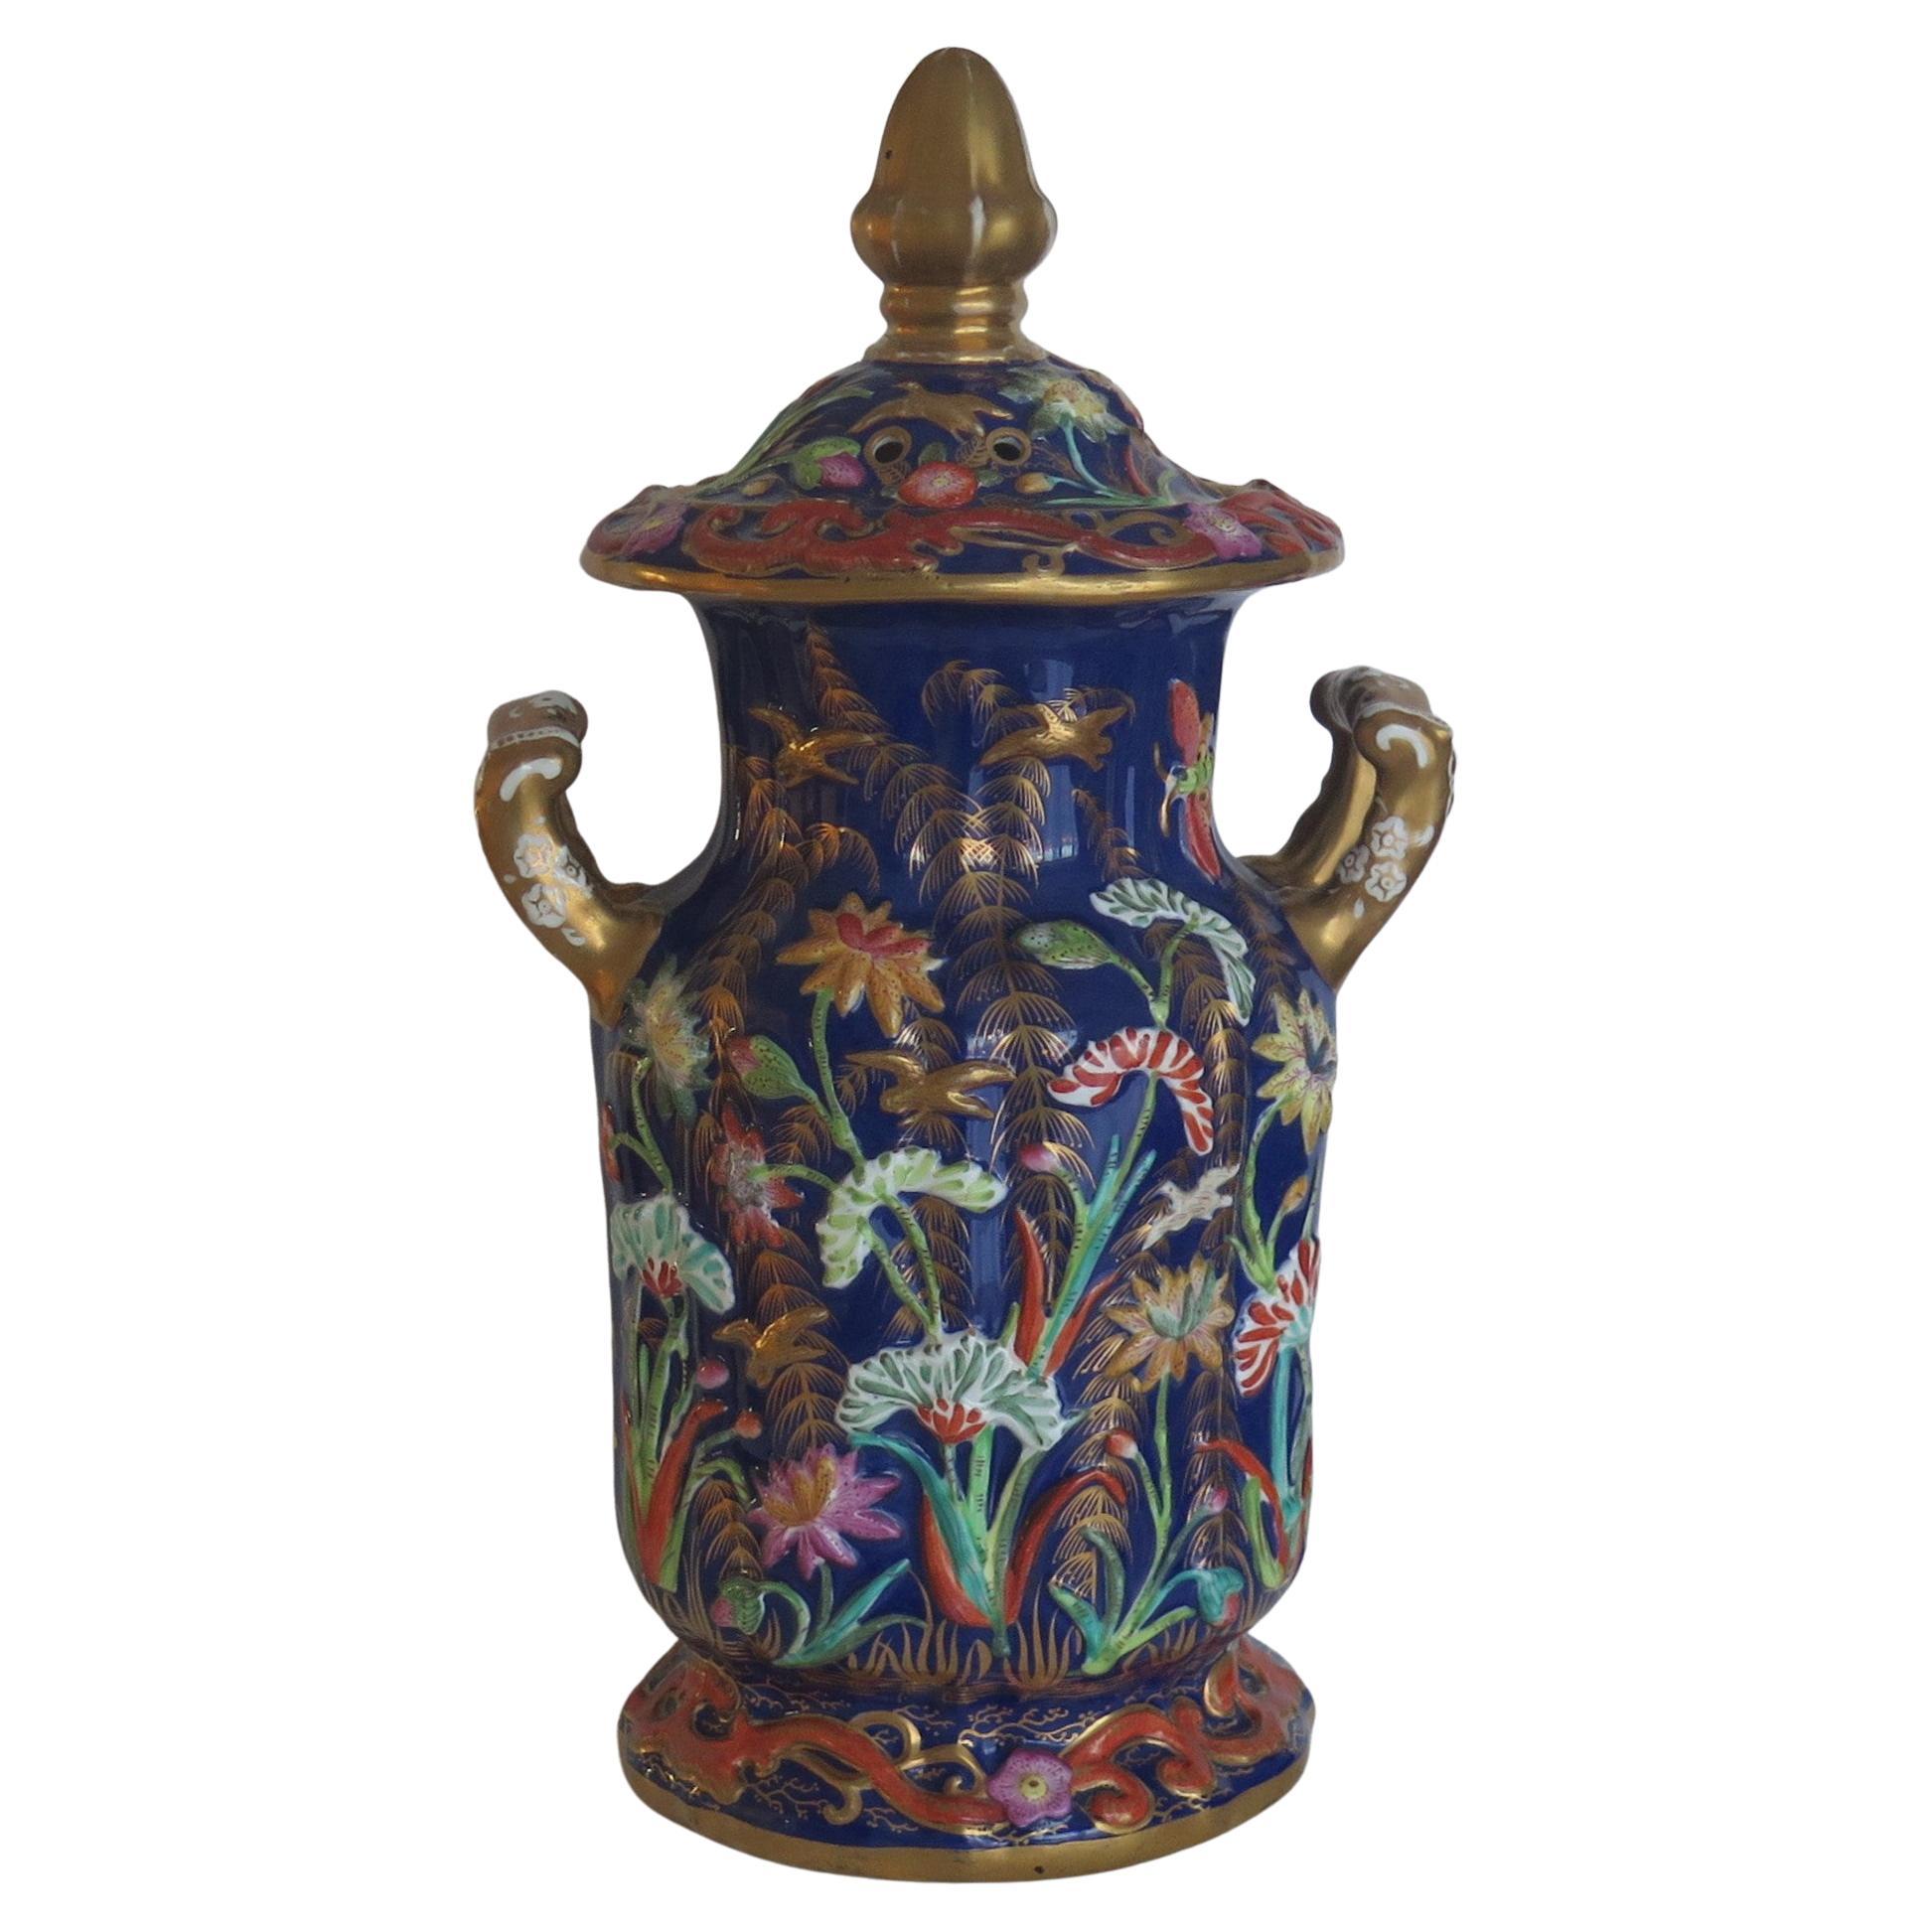 Large Masons Ironstone Covered Vase with very rare Relief Motifs, Circa 1825